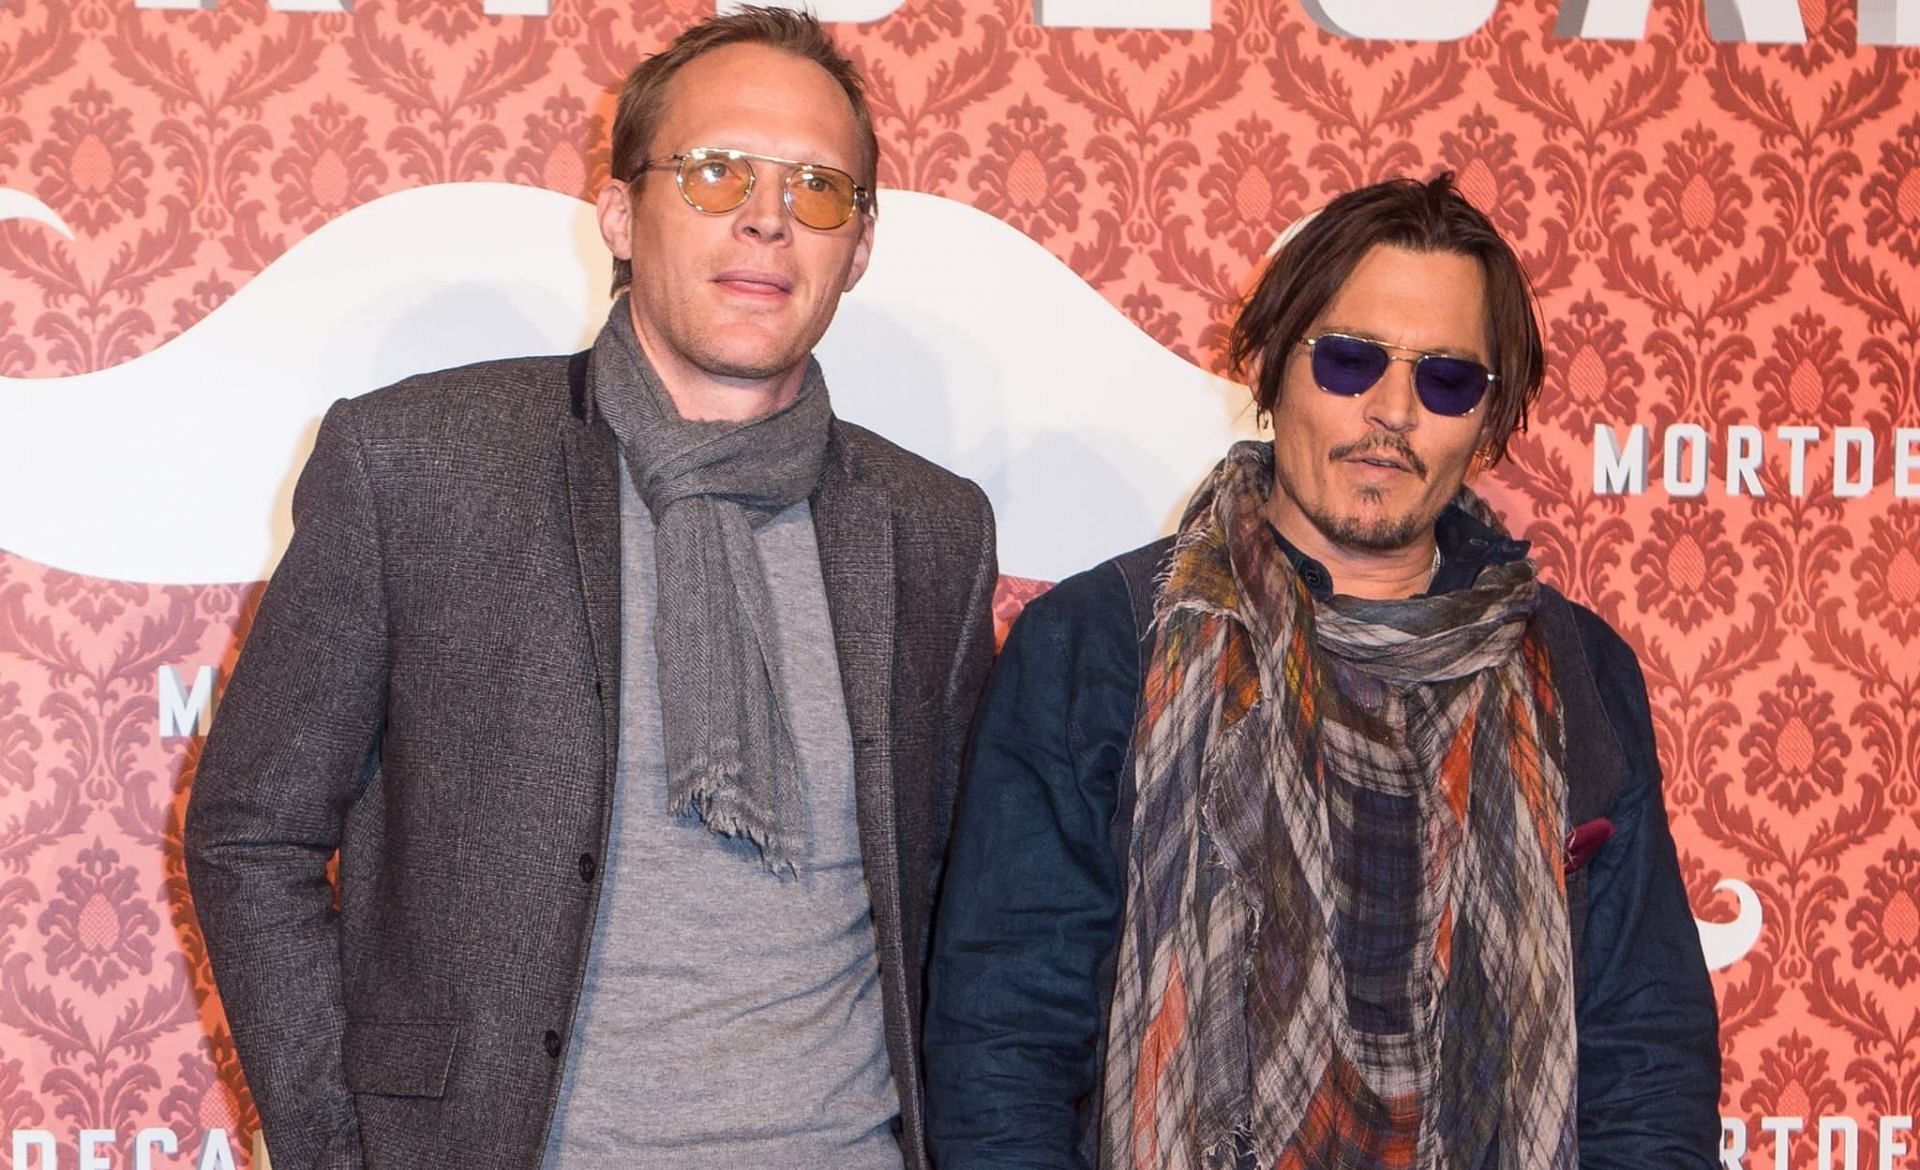 Paul Bettany and Johnny Depp (Image via Christian Marquardt/ Getty Images)